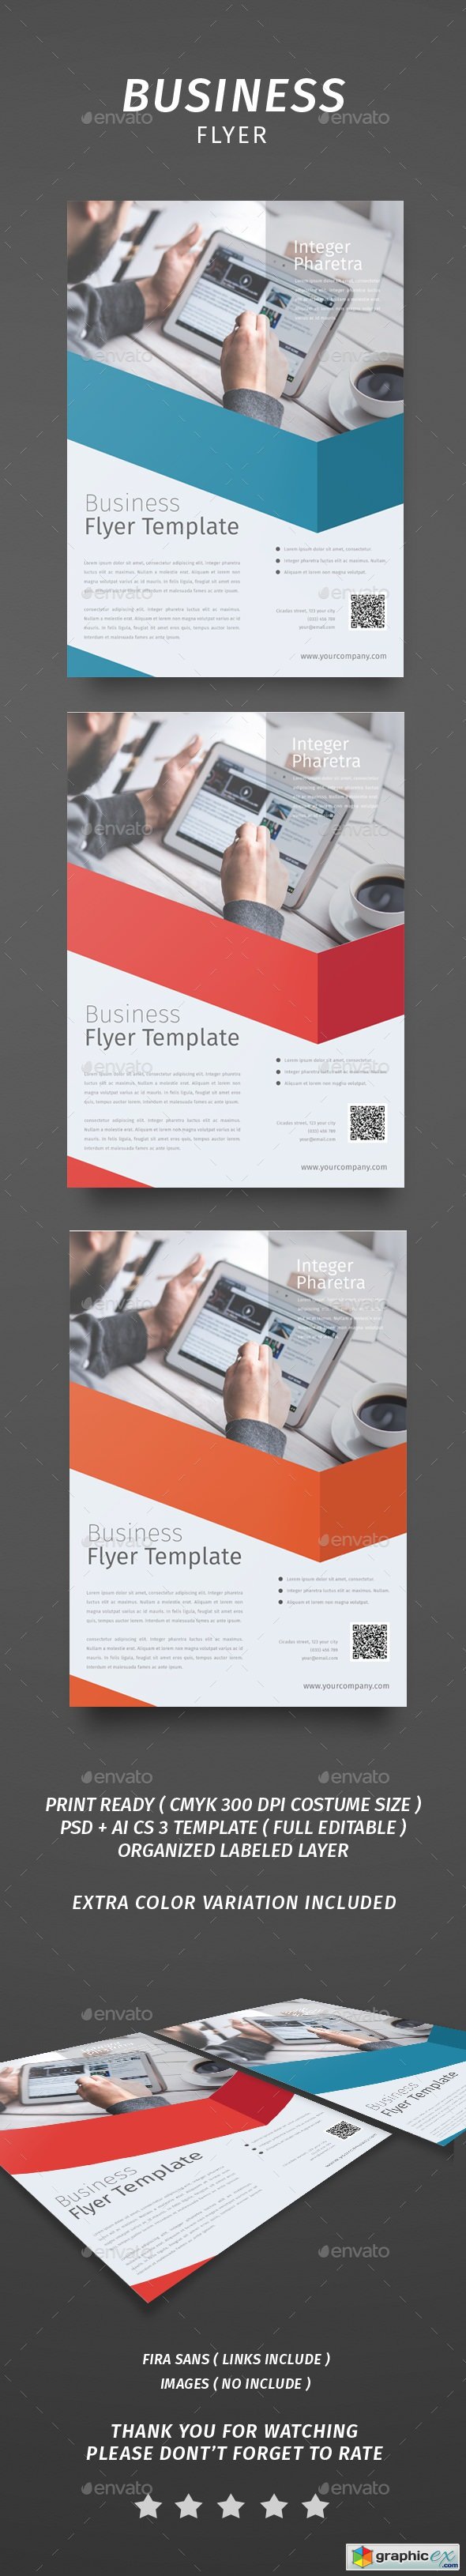 Business Flyer 14365430